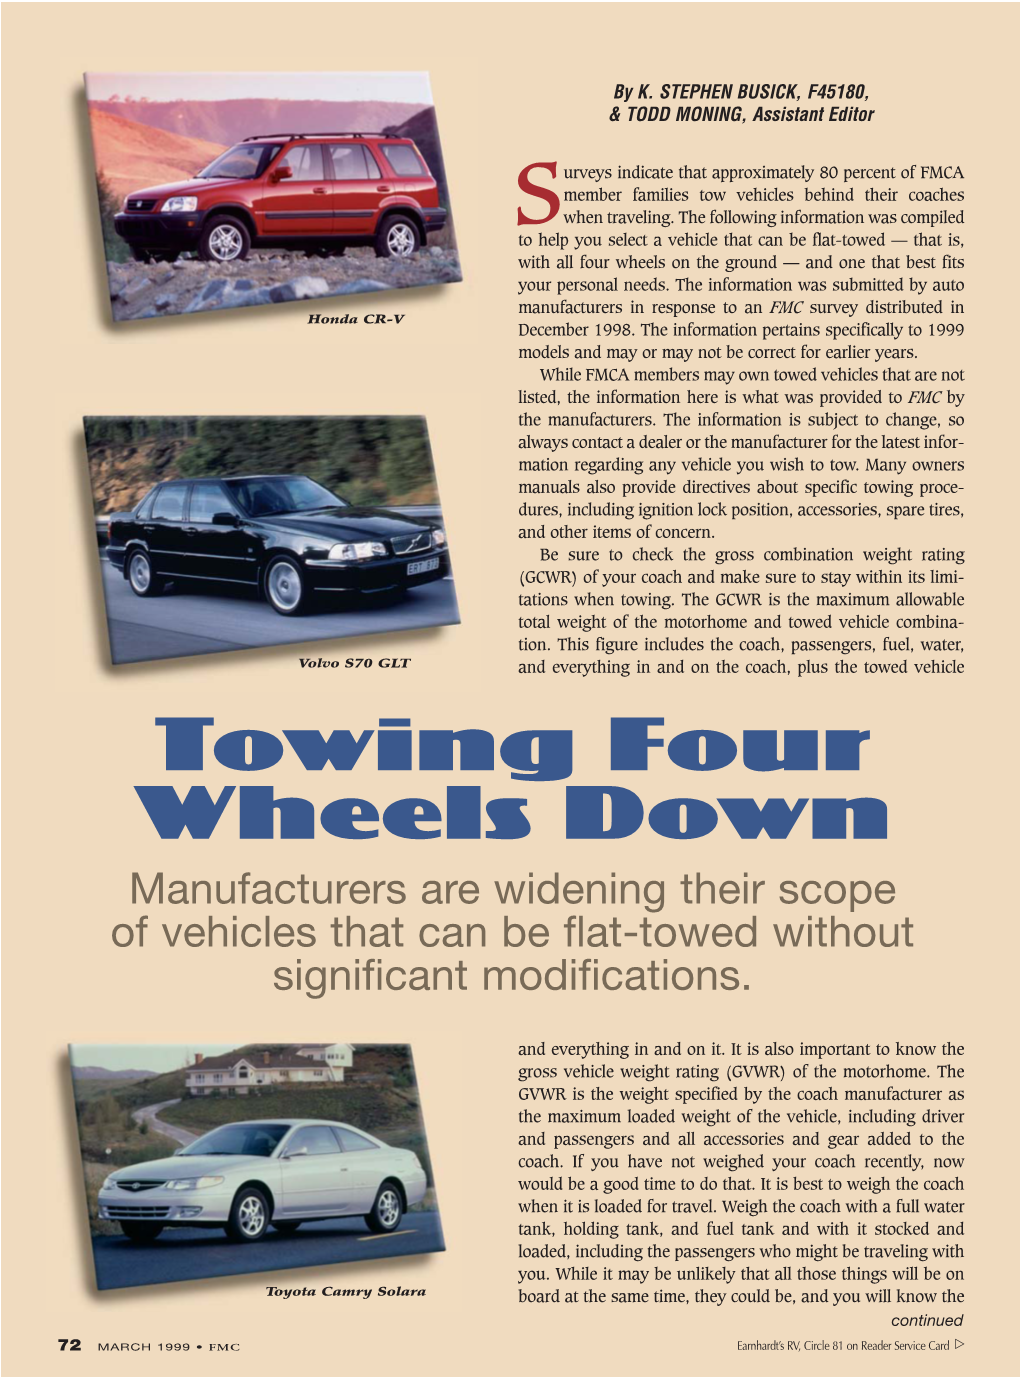 Towing Four Wheels Down Manufacturers Are Widening Their Scope of Vehicles That Can Be Flat-Towed Without Significant Modifications